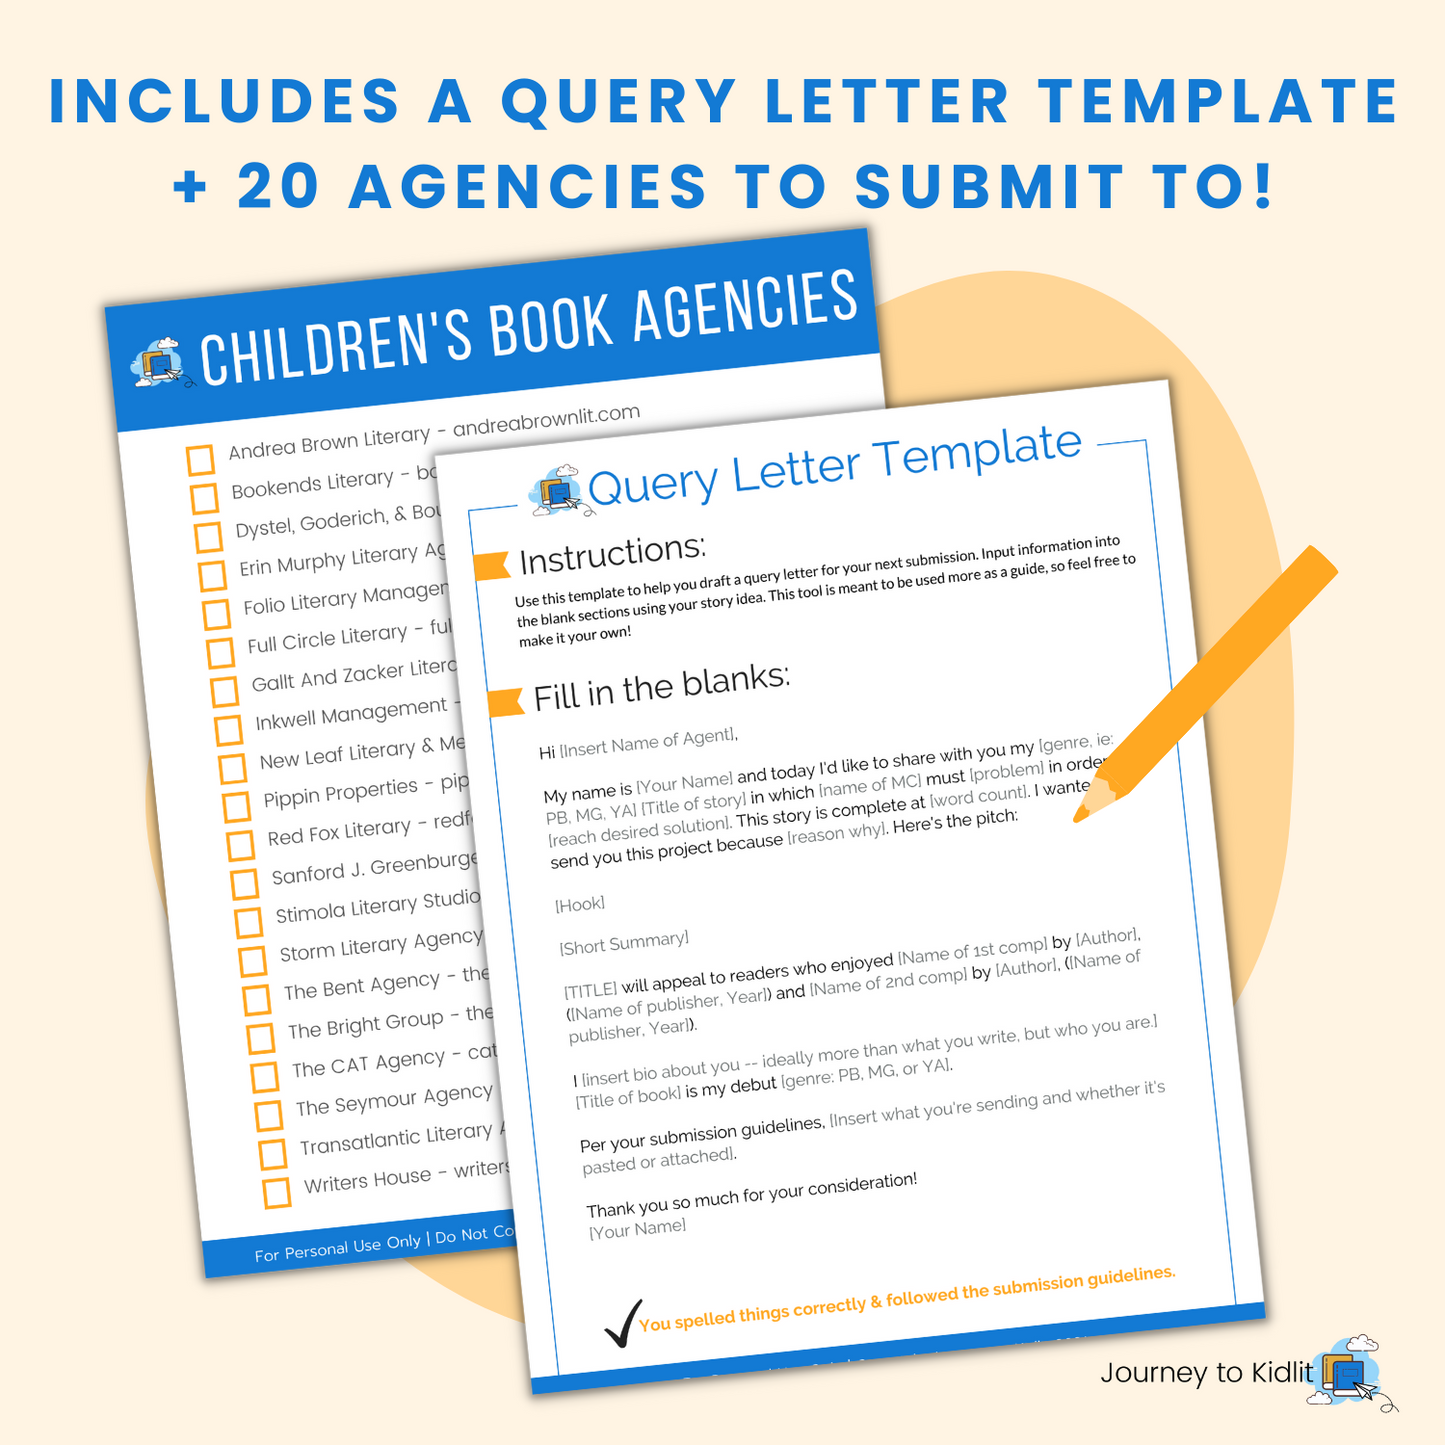 How to Find an Agent Toolkit | Query Letter Help